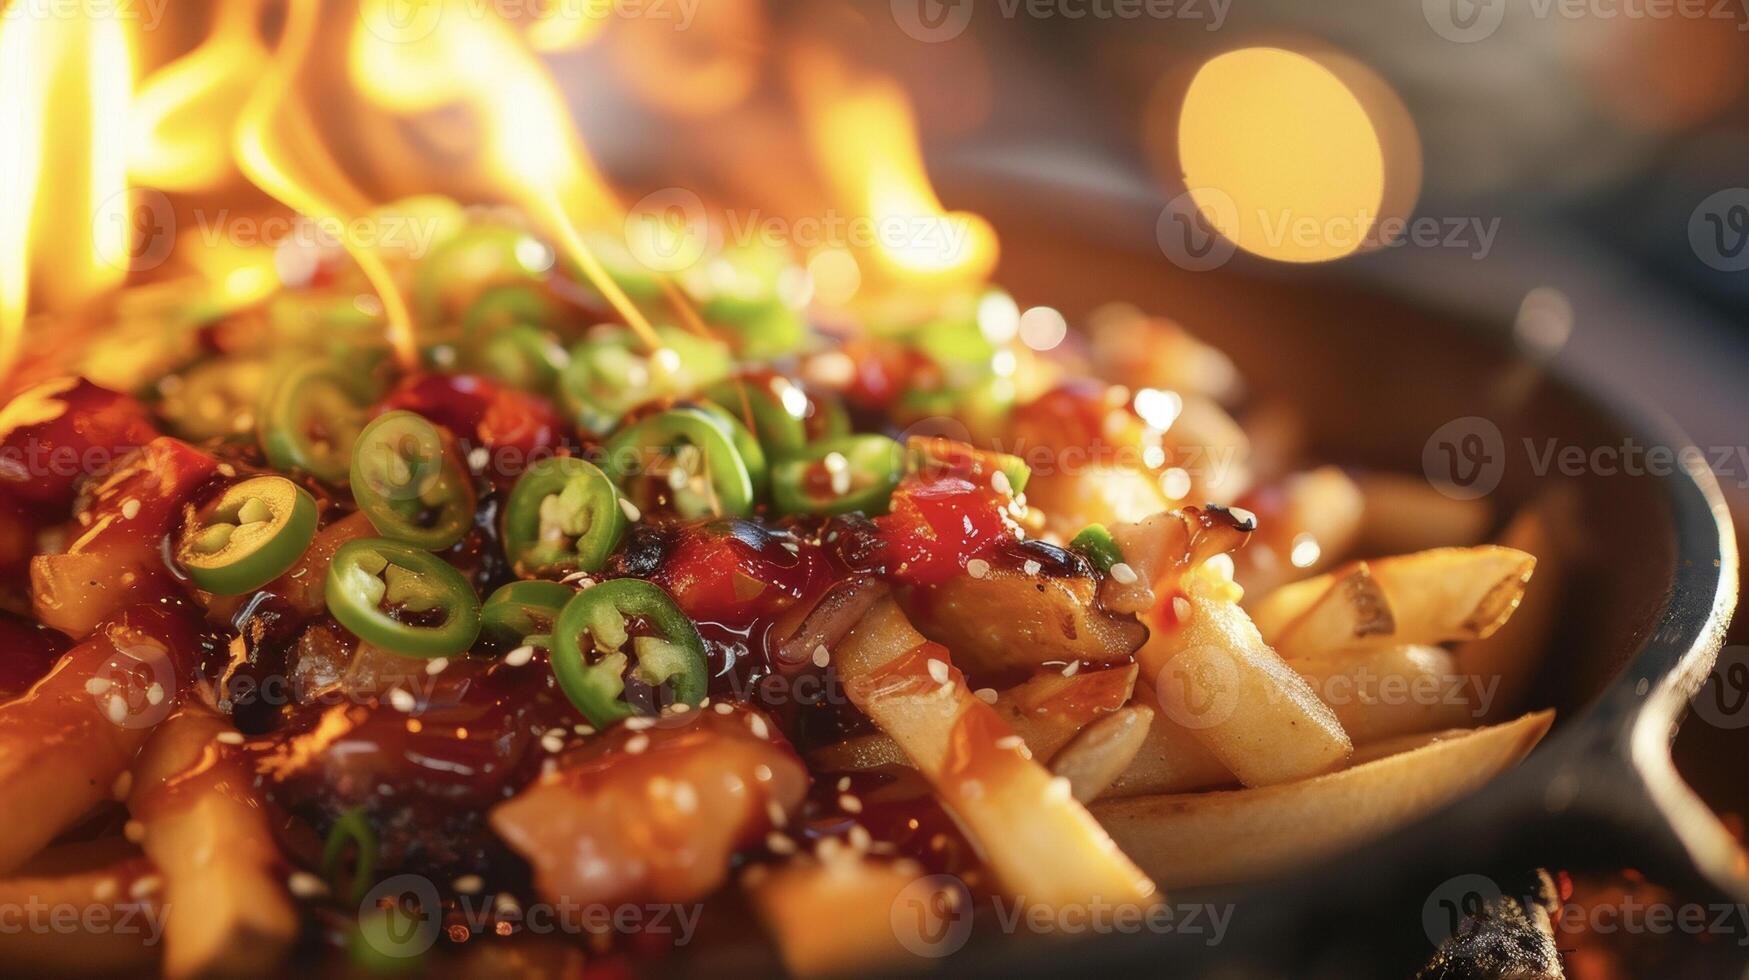 Experience a fiery twist on a clic Canadian dish with this blazing hot poutine topped with jalapenos diced tomatoes and a kick of habanero hot sauce guaranteed to e up an photo